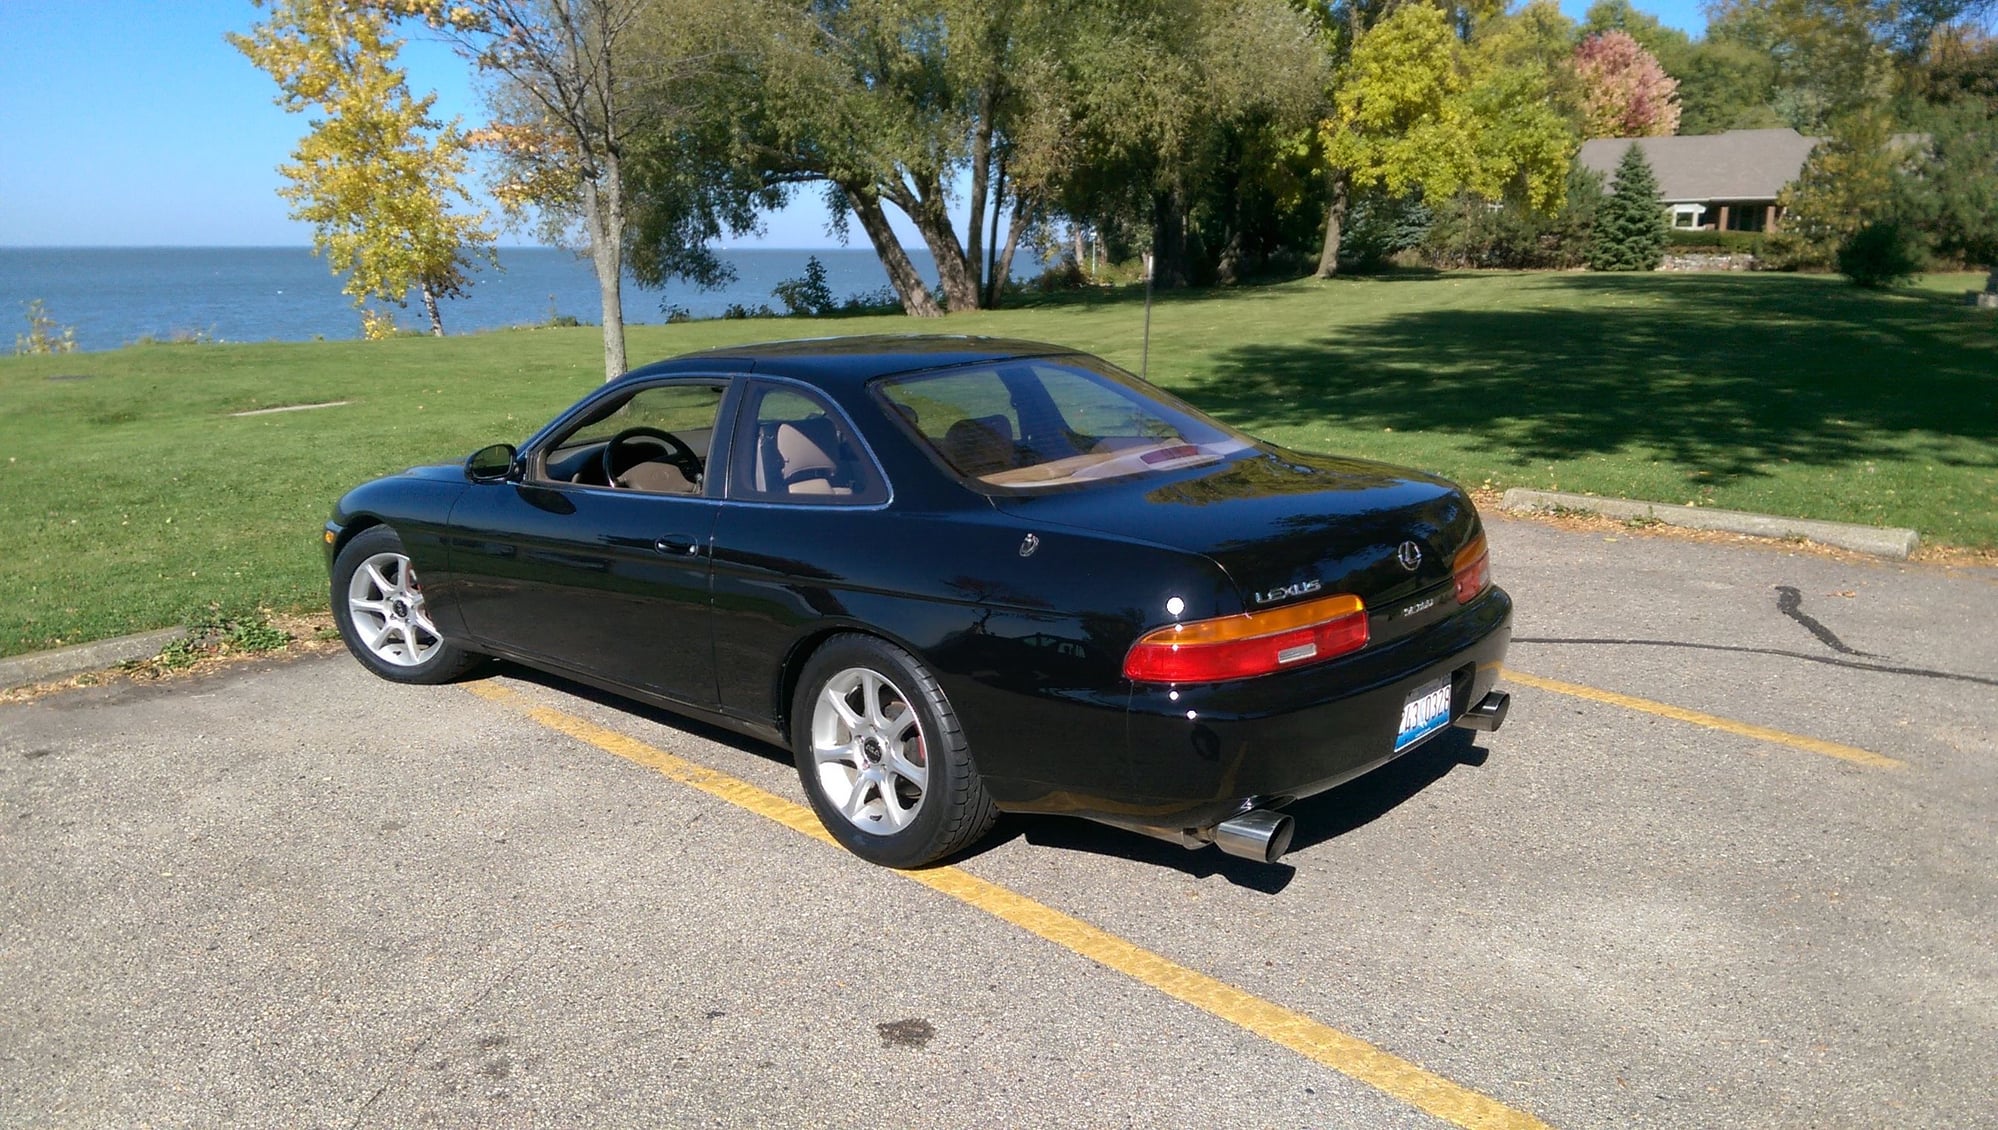 1993 Lexus SC300 - 1993 SC300 5 speed - New - VIN JT8JZ31C6P0010402 - 6 cyl - Coupe - Black - Green Bay, WI 54311, United States